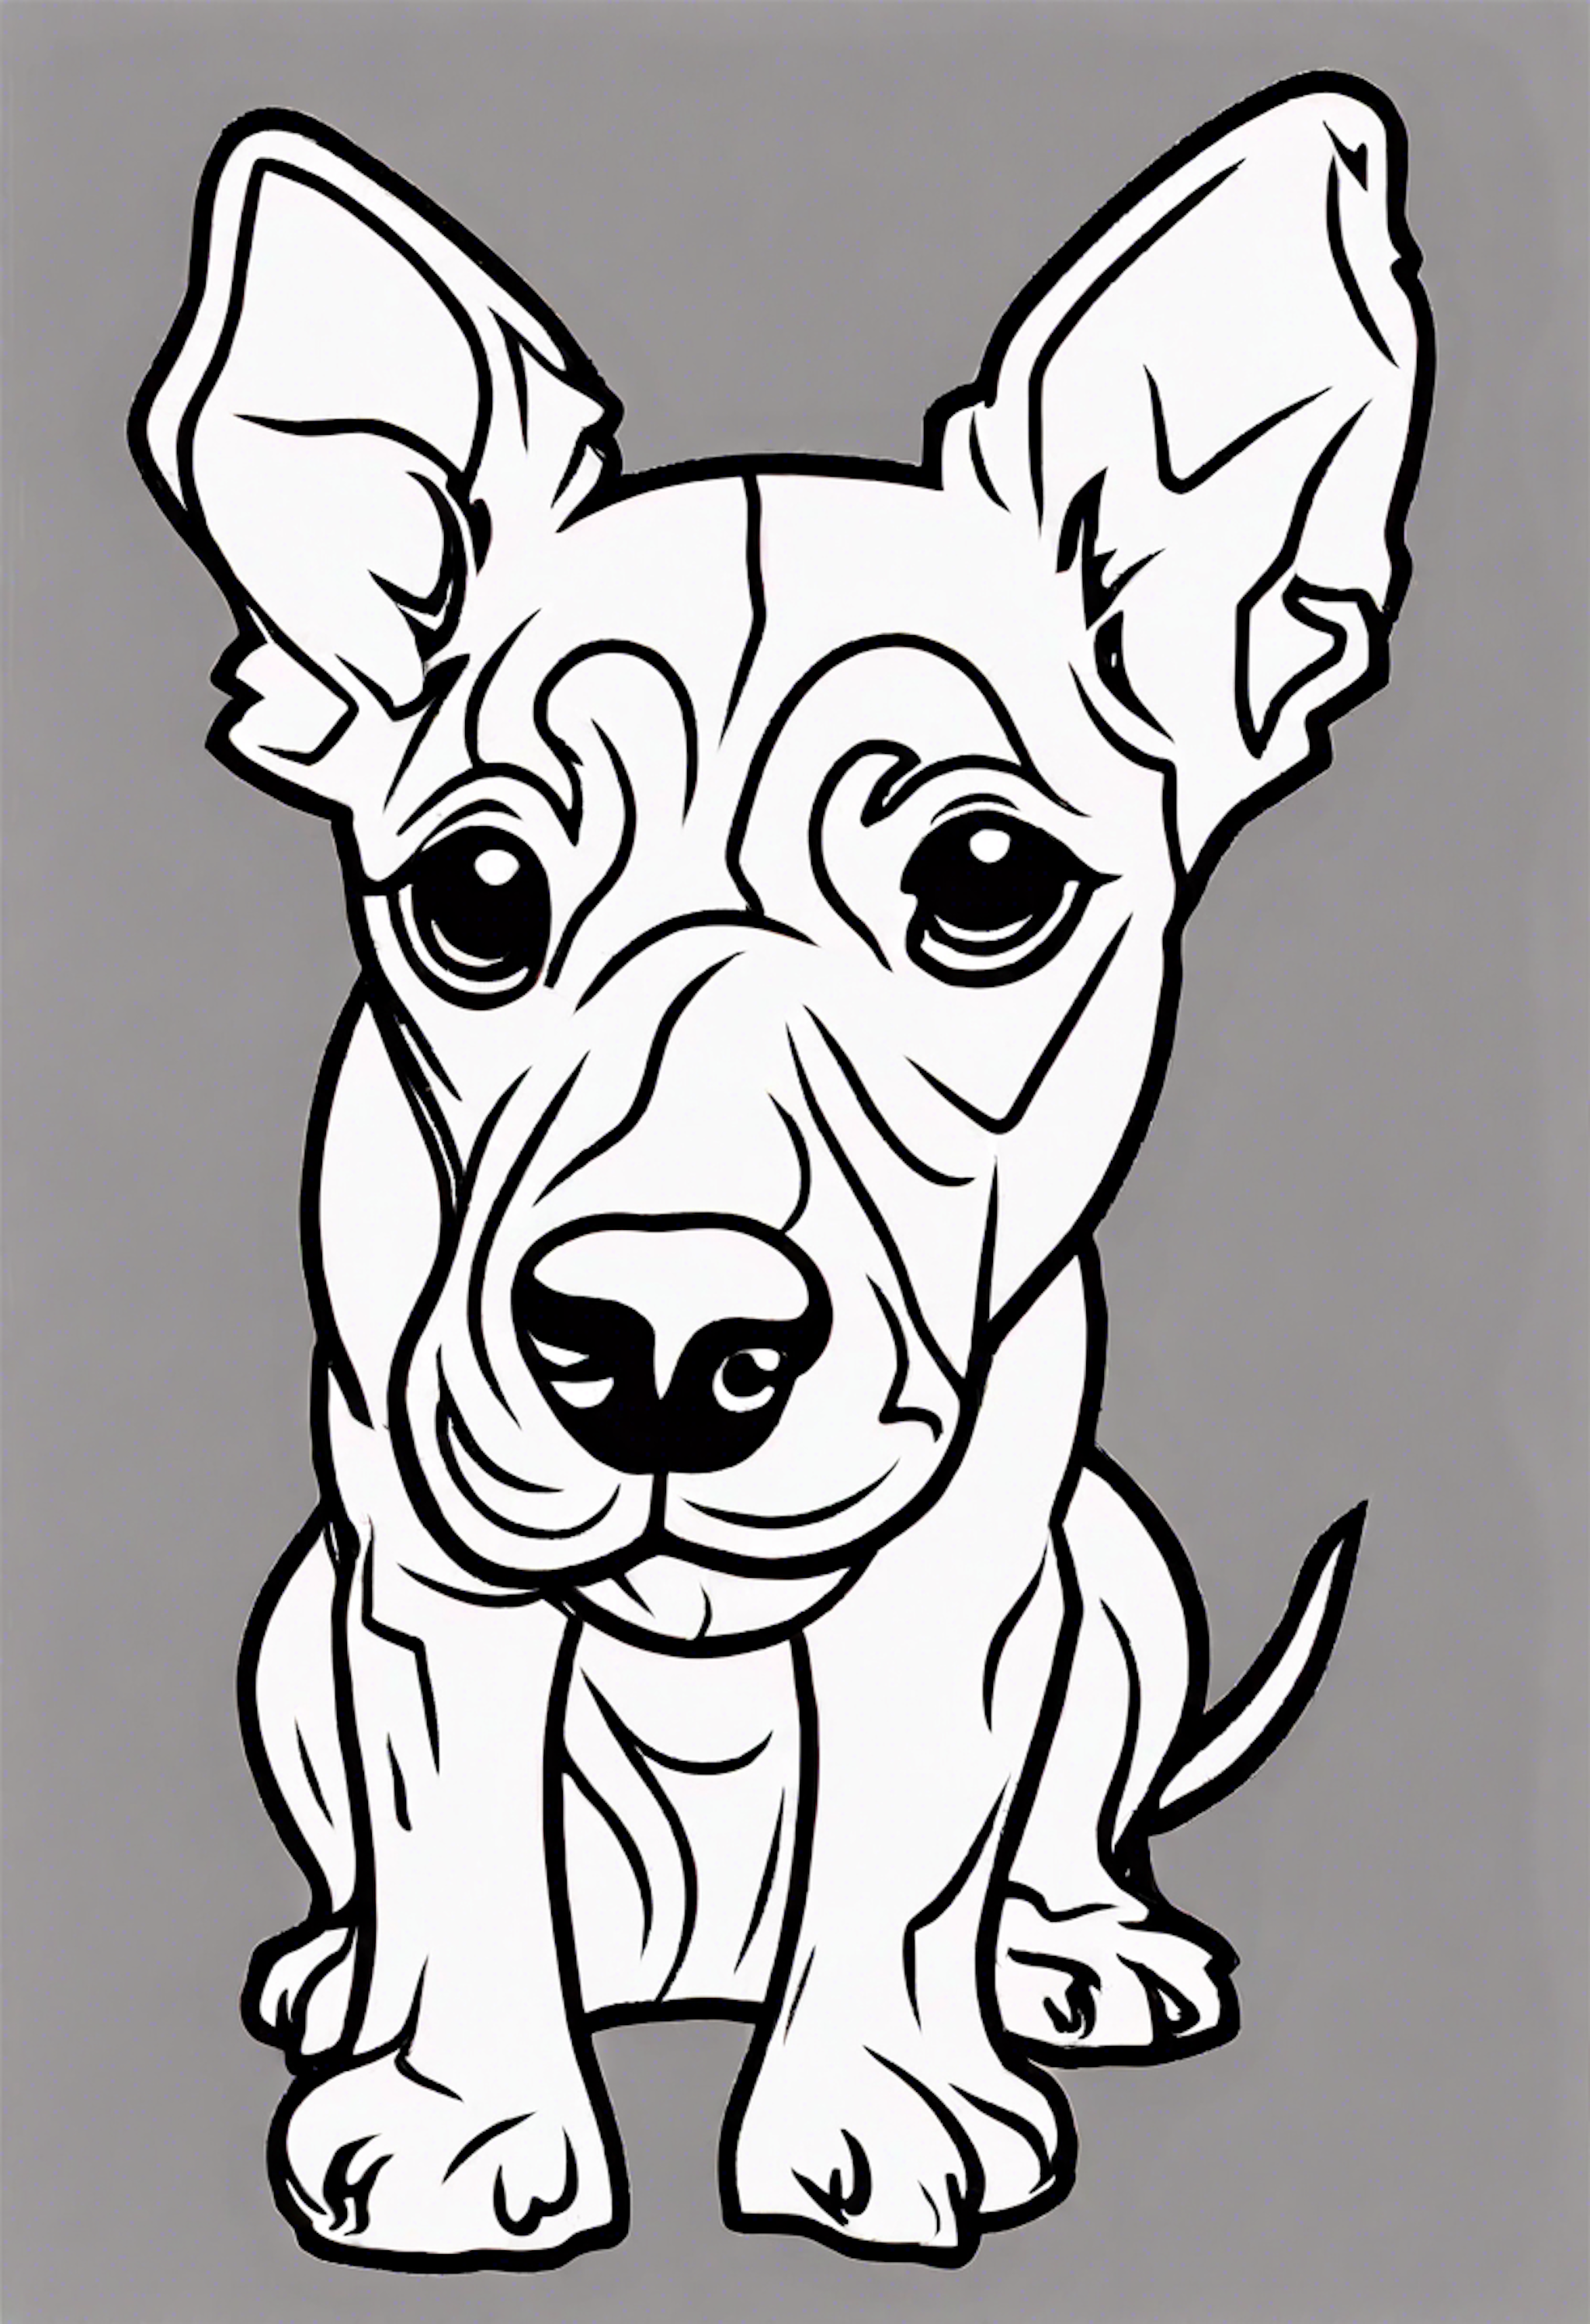 A coloring page for 1 Puppy coloring pages